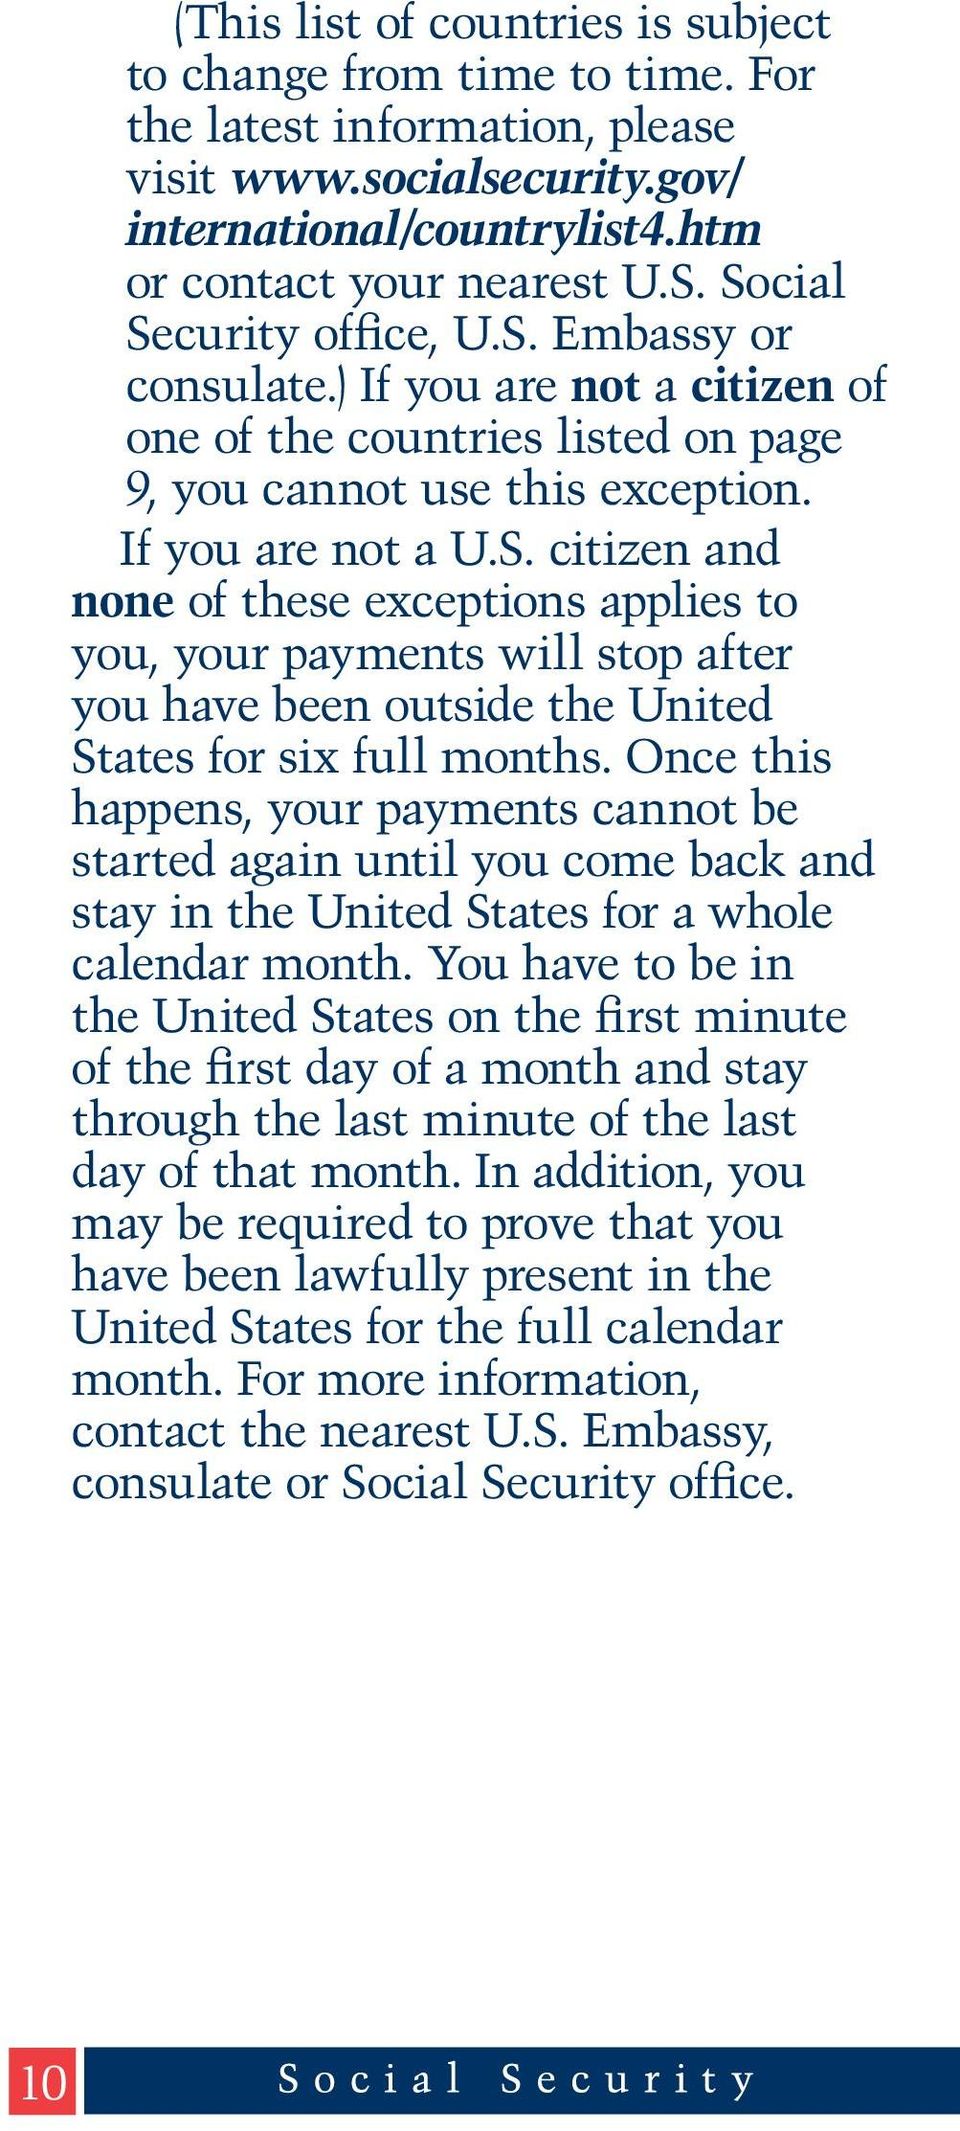 Once this happens, your payments cannot be started again until you come back and stay in the United States for a whole calendar month.